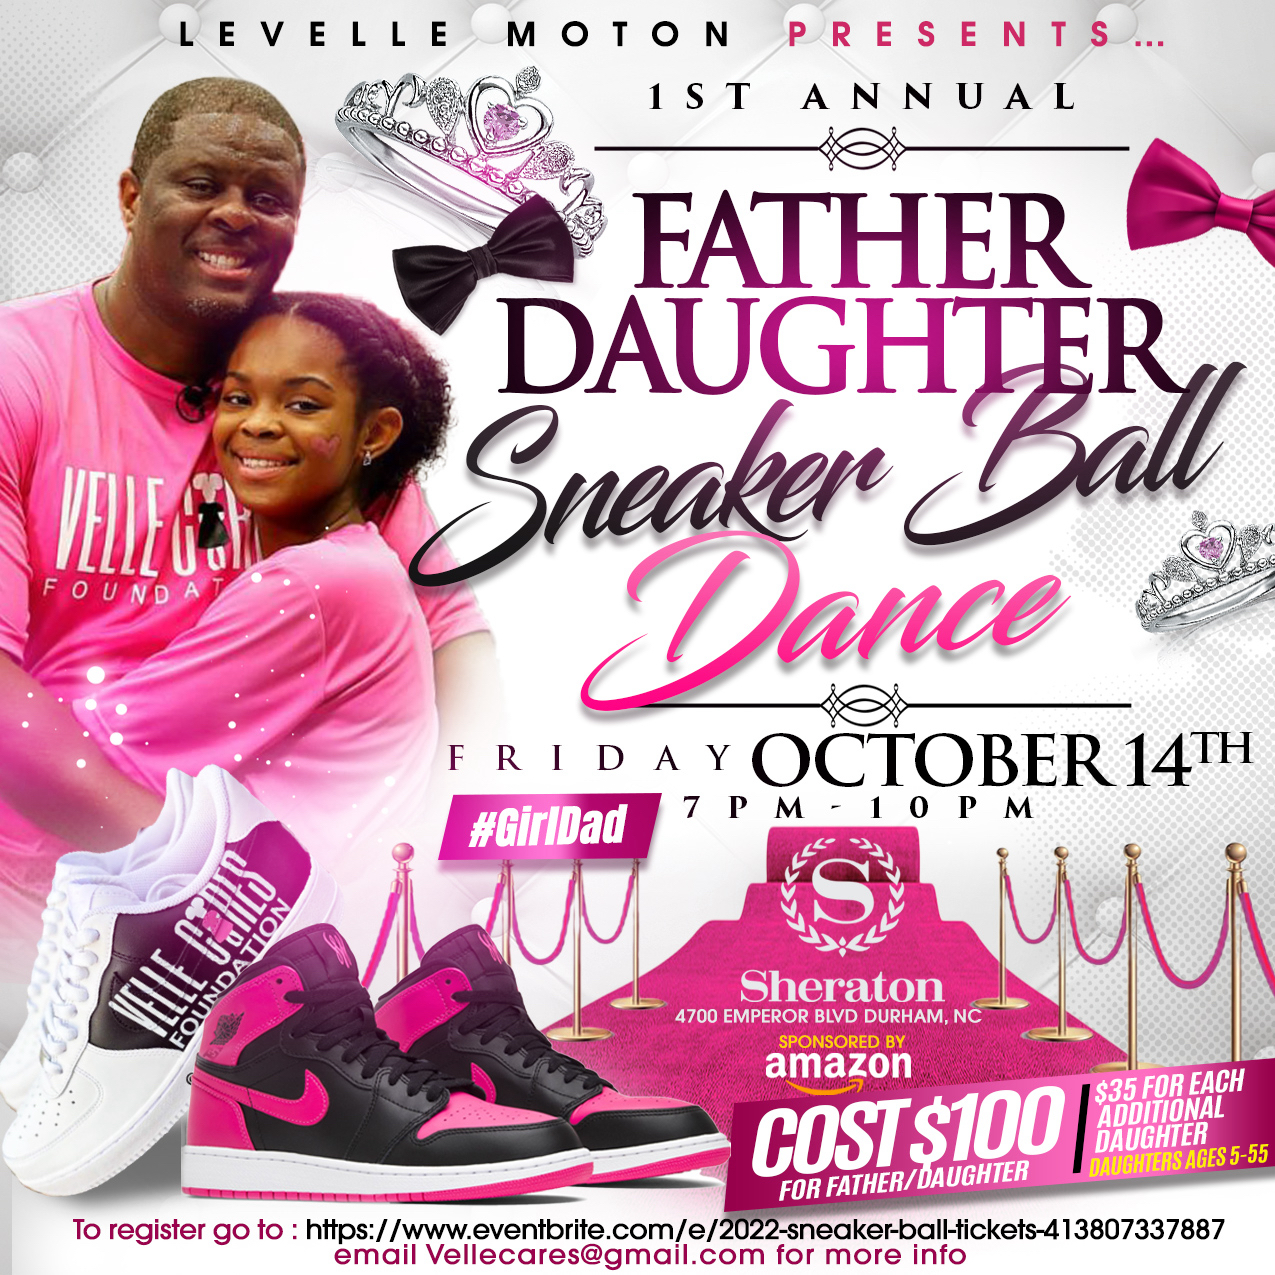 Levelle-Oct-14th-1st-Annual-Father-Daughter-Sneaker-Ball-Dance-flyer-090522